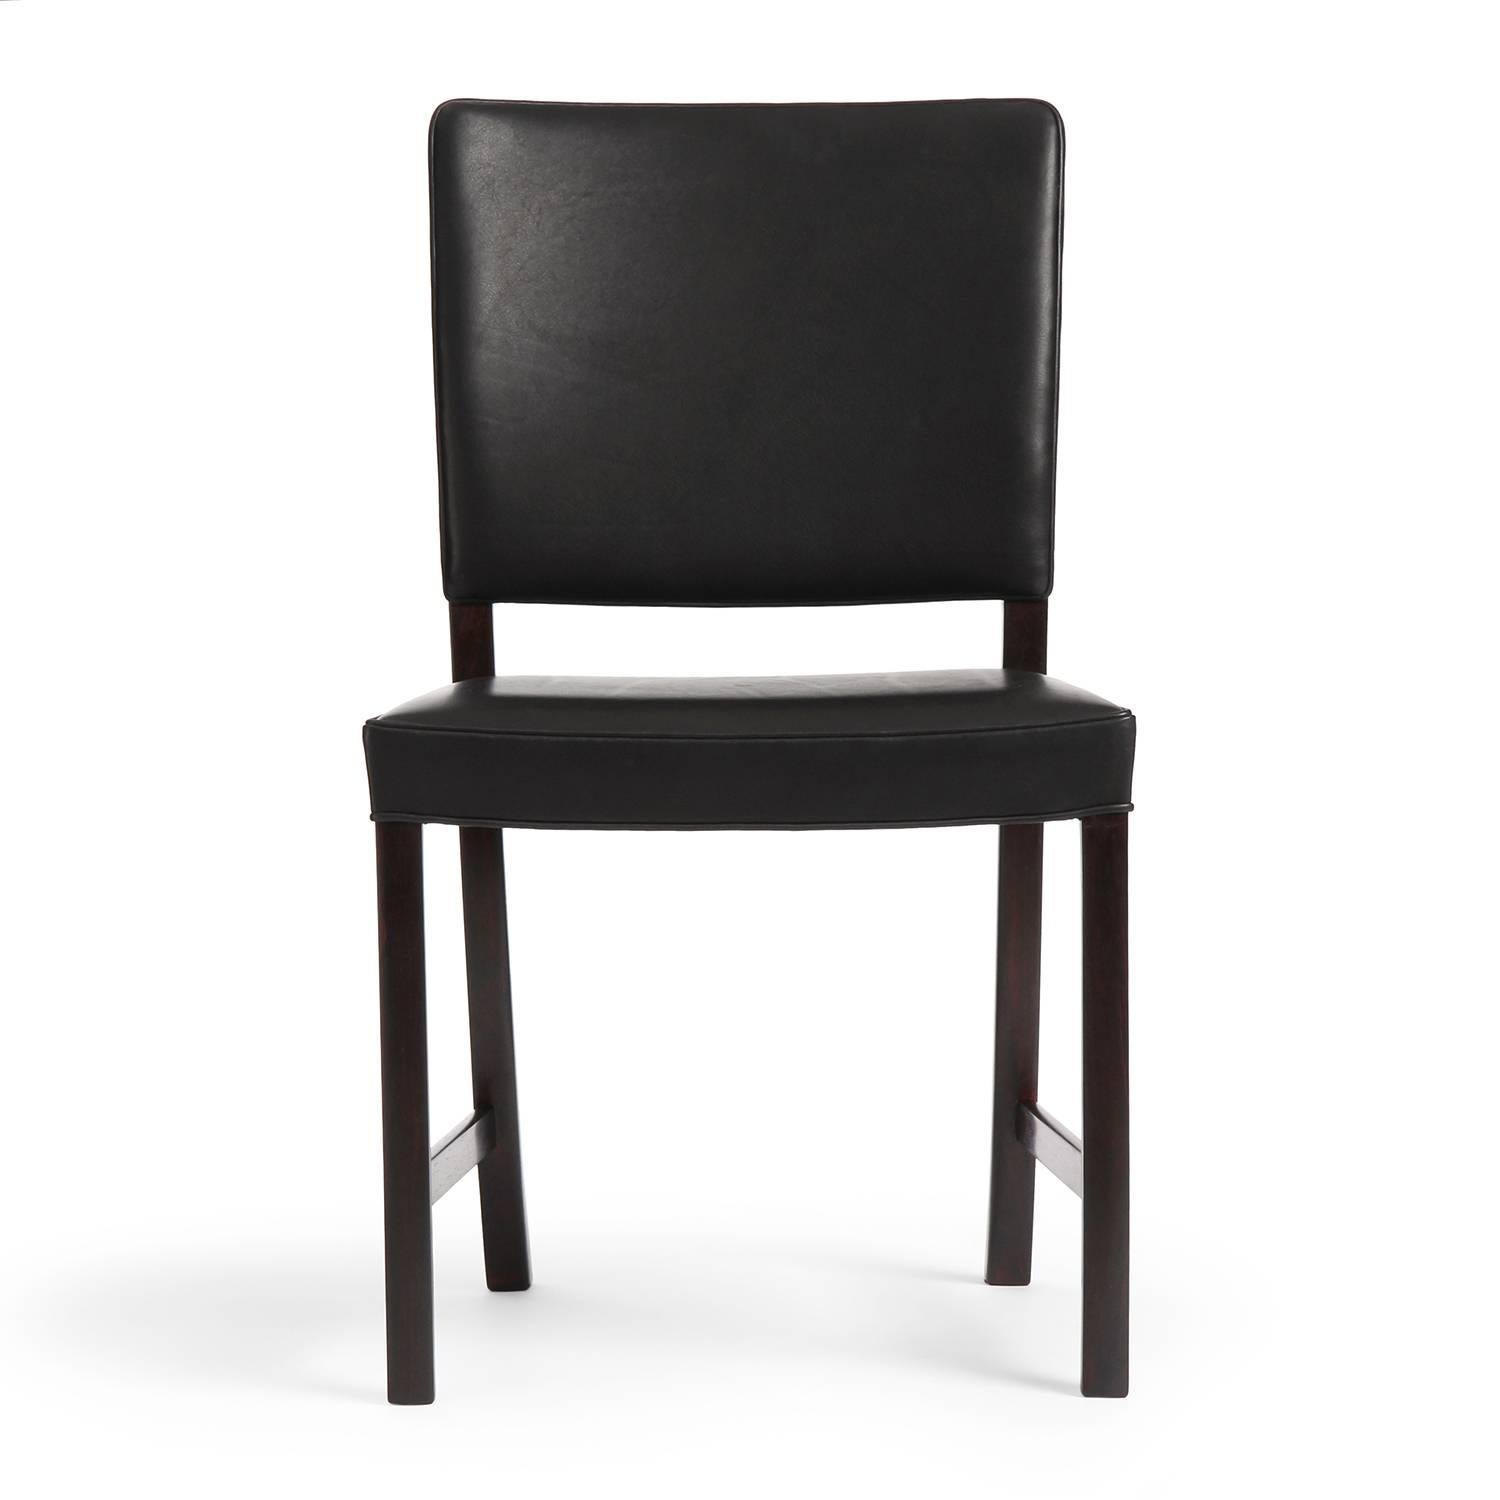 A refined and elegant dining chair having spare Brazilian rosewood frames and oiled black leather upholstery.